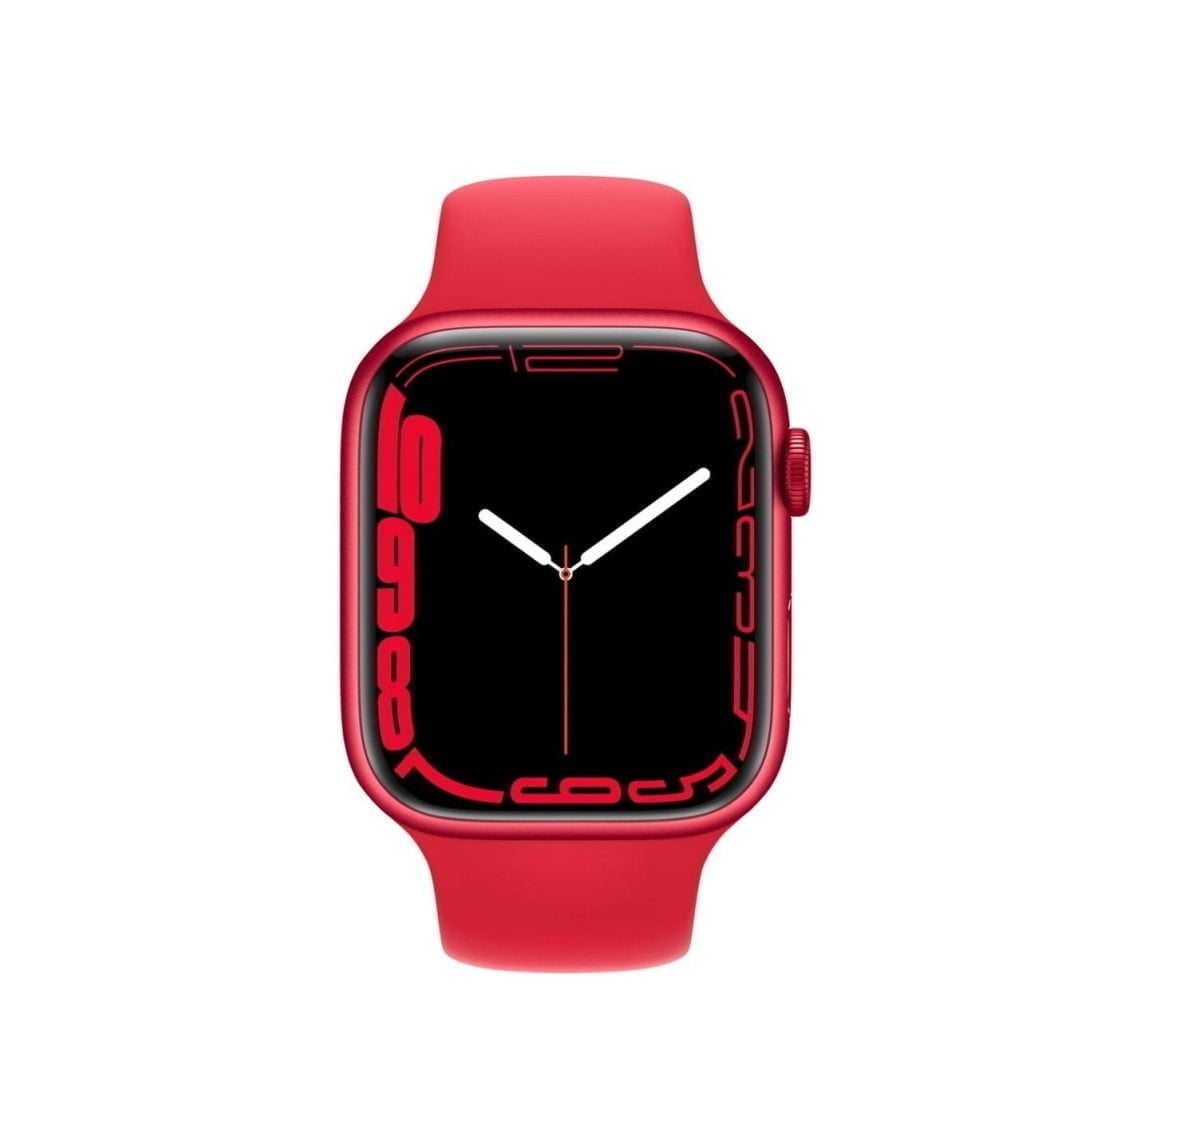 Apple &Lt;H1&Gt;Apple Watch Series 7 (Gps) 45Mm Aluminum Case With Sport Band - (Product Red)&Lt;/H1&Gt; &Lt;Div Class=&Quot;Long-Description-Container Body-Copy &Quot;&Gt; &Lt;Div Class=&Quot;Html-Fragment&Quot;&Gt; &Lt;Div&Gt; &Lt;Div&Gt;The Largest, Most Advanced Always-On Retina Display Yet Makes Everything You Do With Your Apple Watch Series 7 Bigger And Better. Series 7 Is The Most Durable Apple Watch Ever Built, With An Even More Crack-Resistant Front Crystal. Advanced Features Let You Measure Your Blood Oxygen Level,¹ Take An Ecg Anytime, And Access Mindfulness And Sleep Tracking Apps. You Can Also Track Dozens Of Workouts, Including New Tai Chi And Pilates.&Lt;/Div&Gt; &Lt;/Div&Gt; &Lt;/Div&Gt; &Lt;/Div&Gt; Apple Watch Series 7 Apple Watch Series 7 (Gps) 45Mm Aluminum Case With Sport Band - (Product Red)